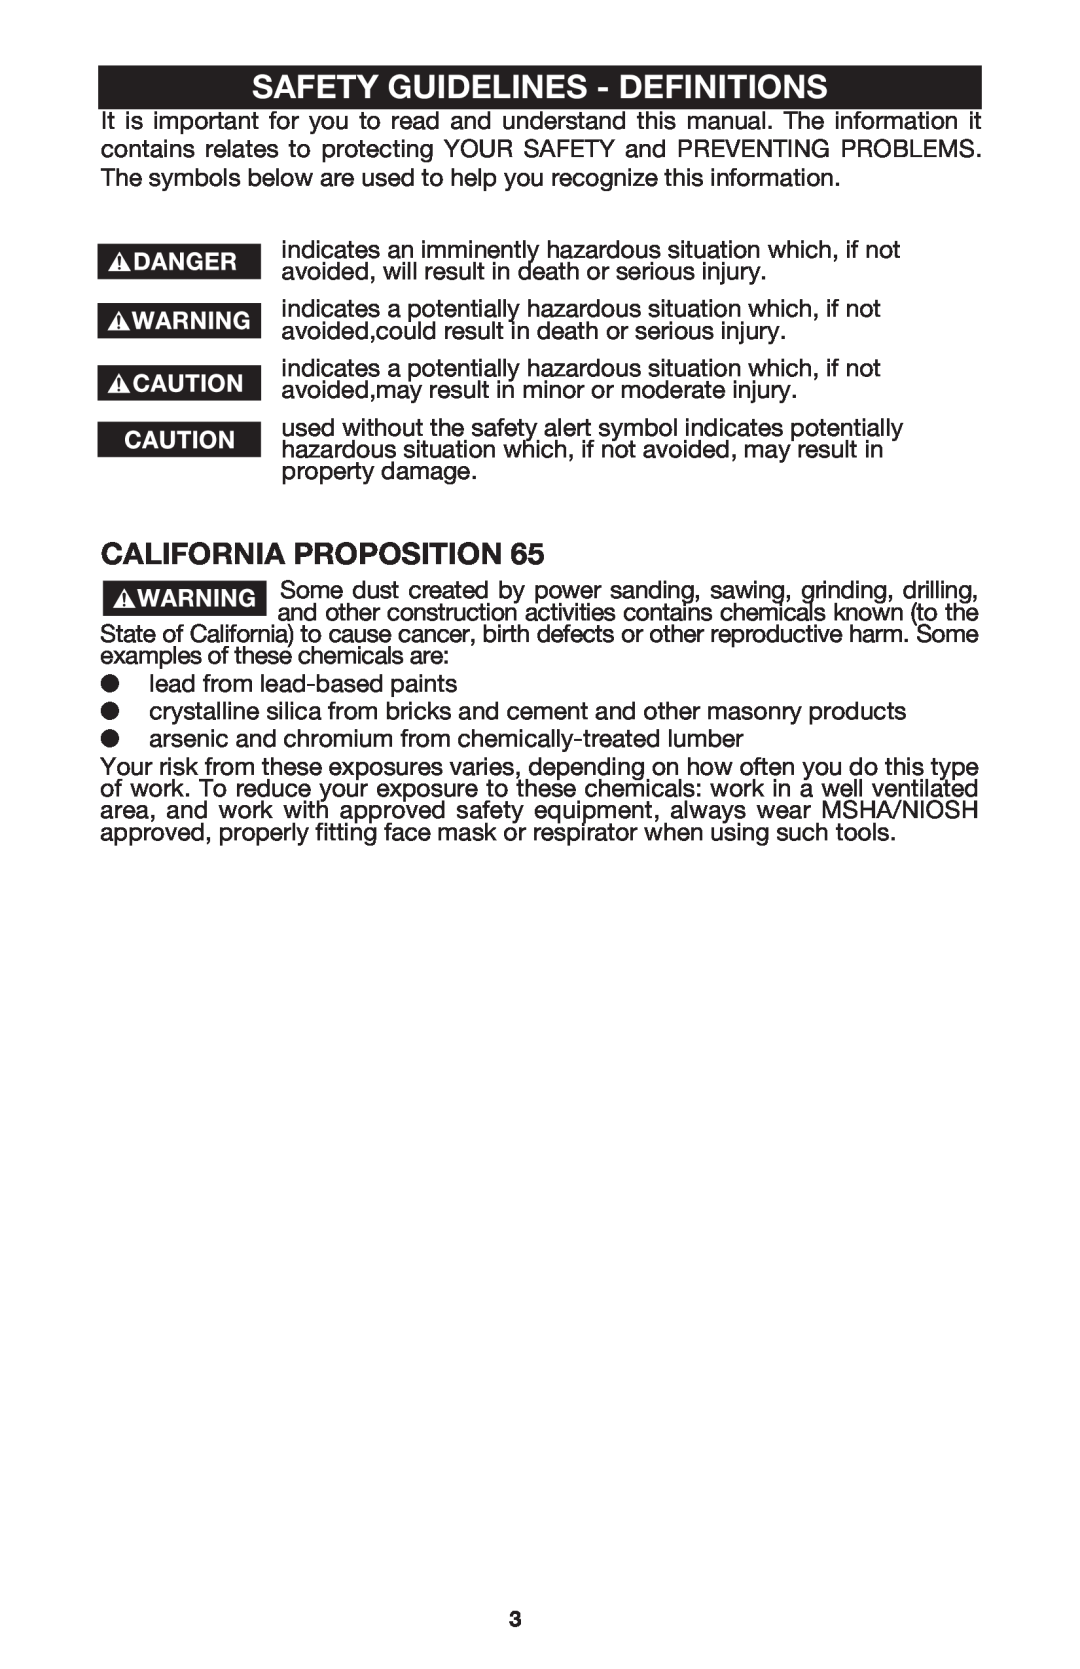 Porter-Cable 7310 instruction manual Safety Guidelines - Definitions, California Proposition 